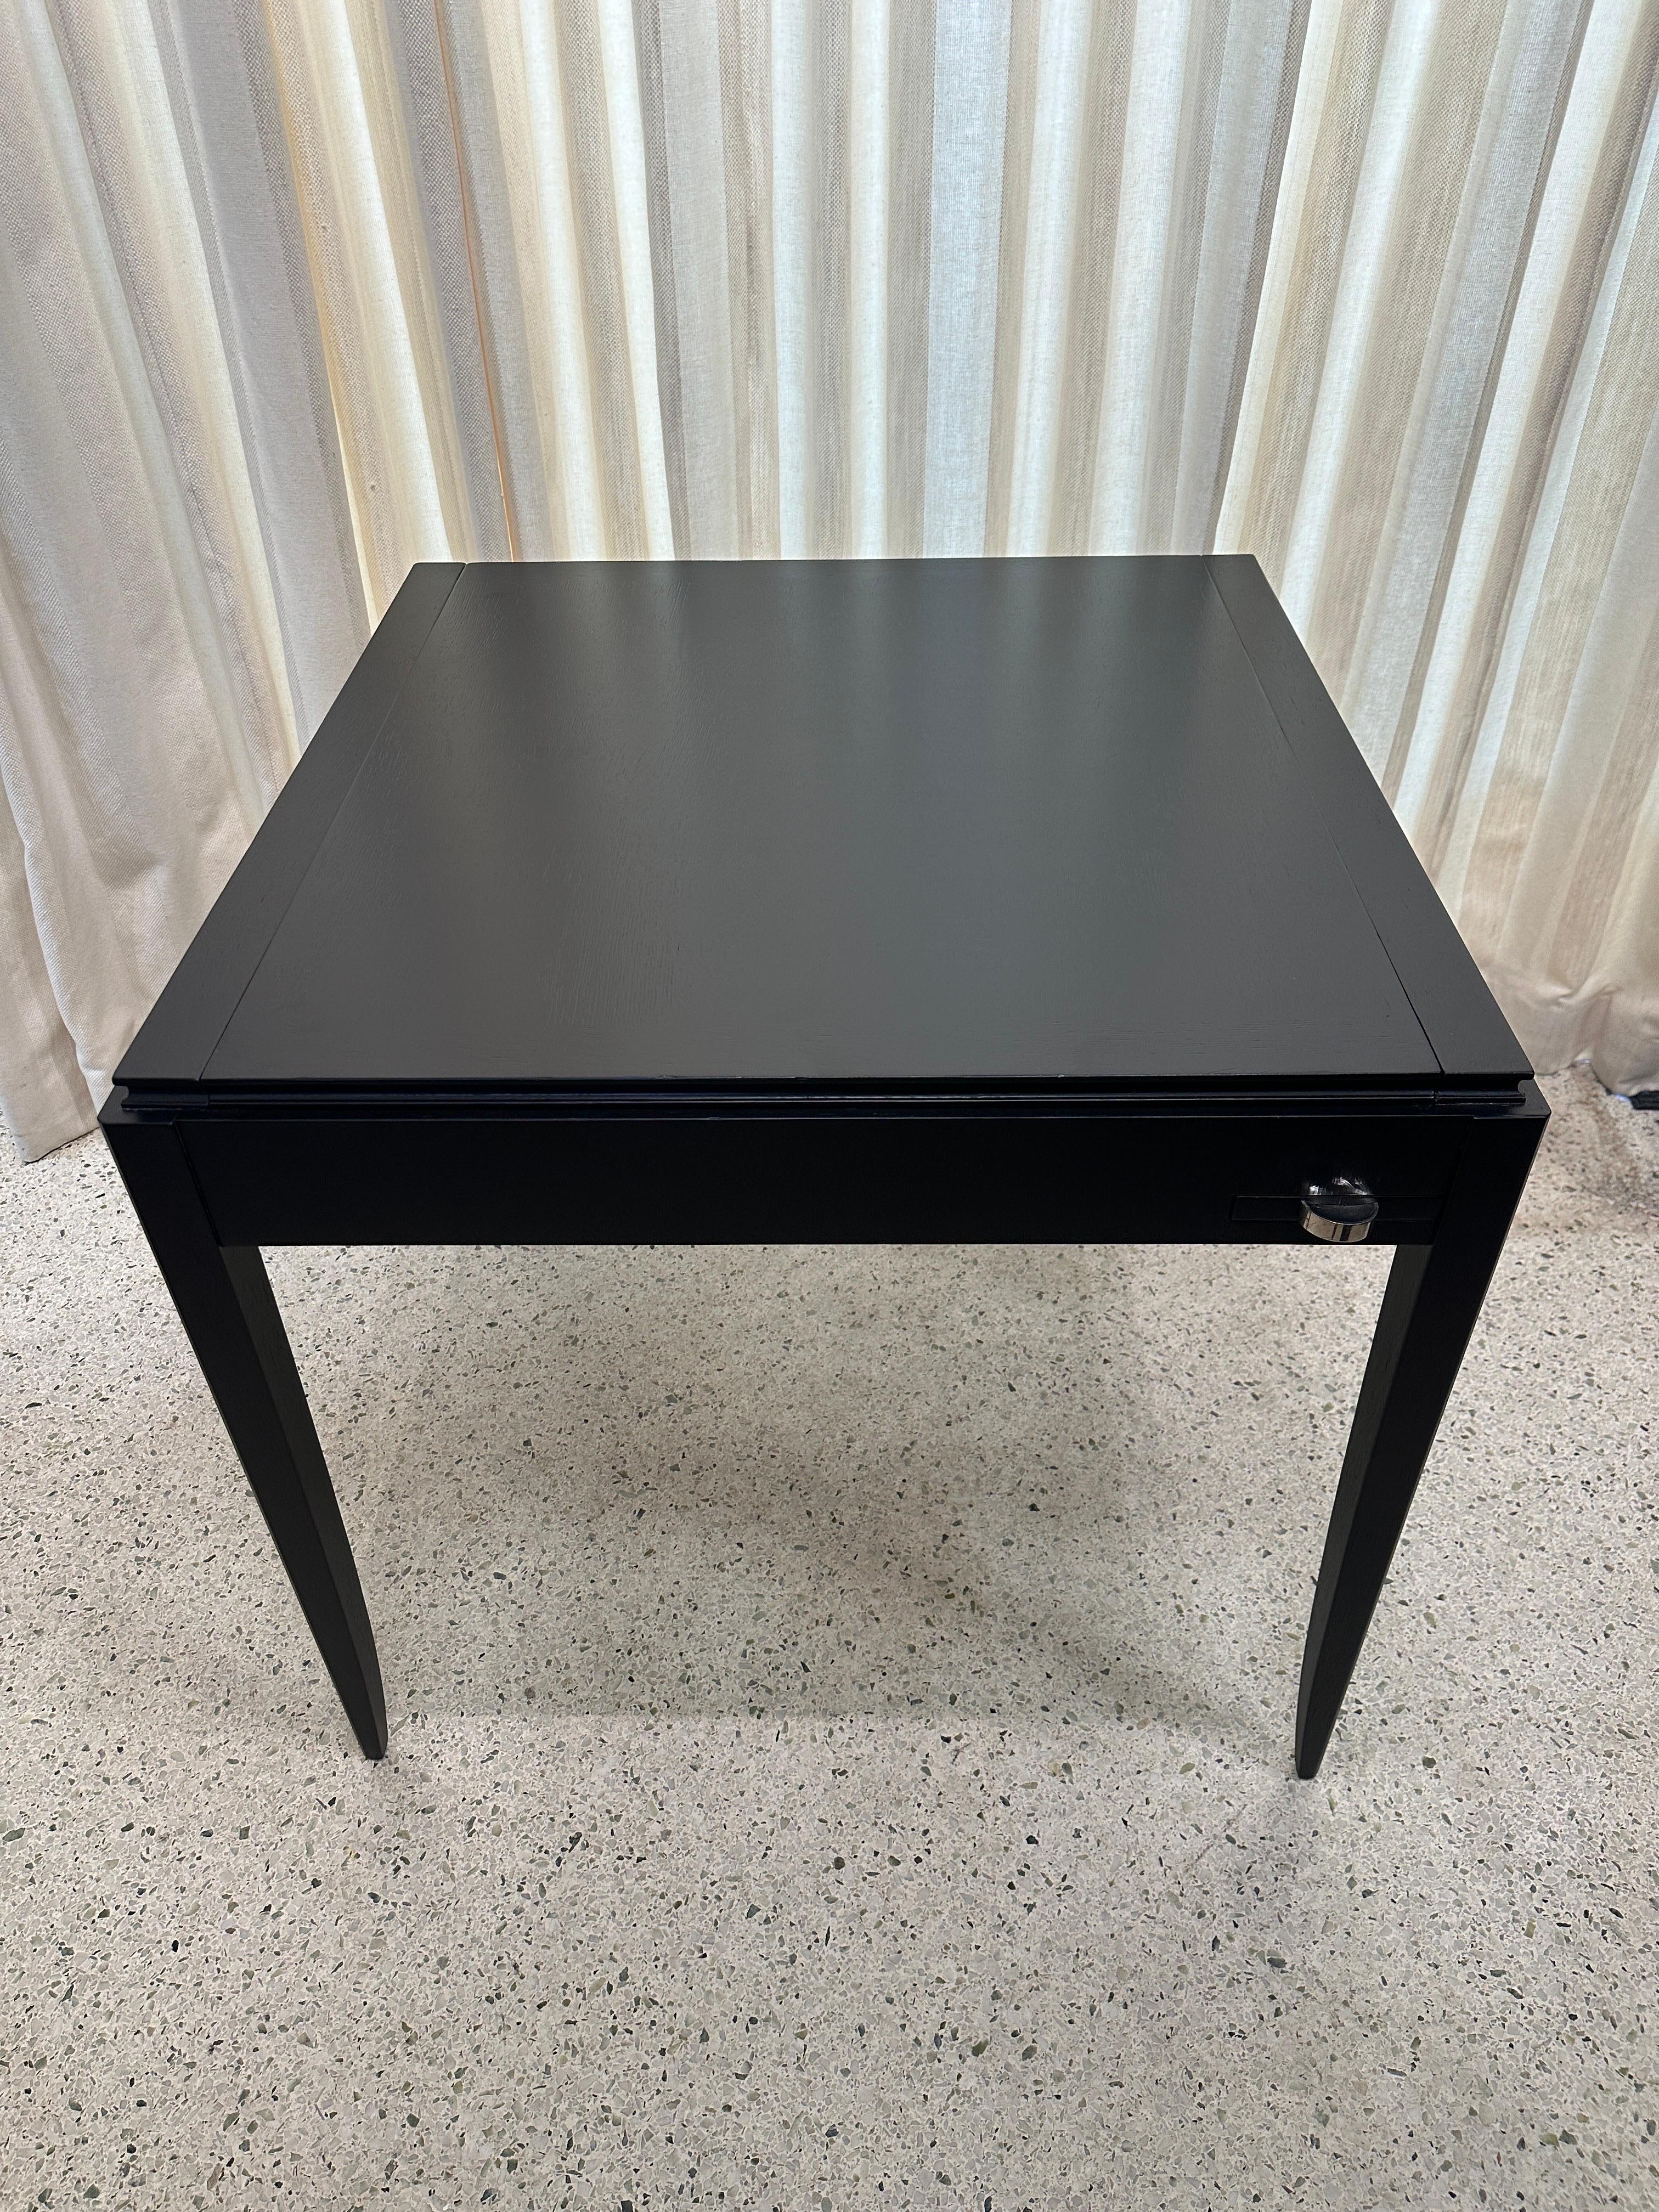 Mid-20th Century French Art Deco Ebonized Cerused Oak Game Table from 1940's For Sale